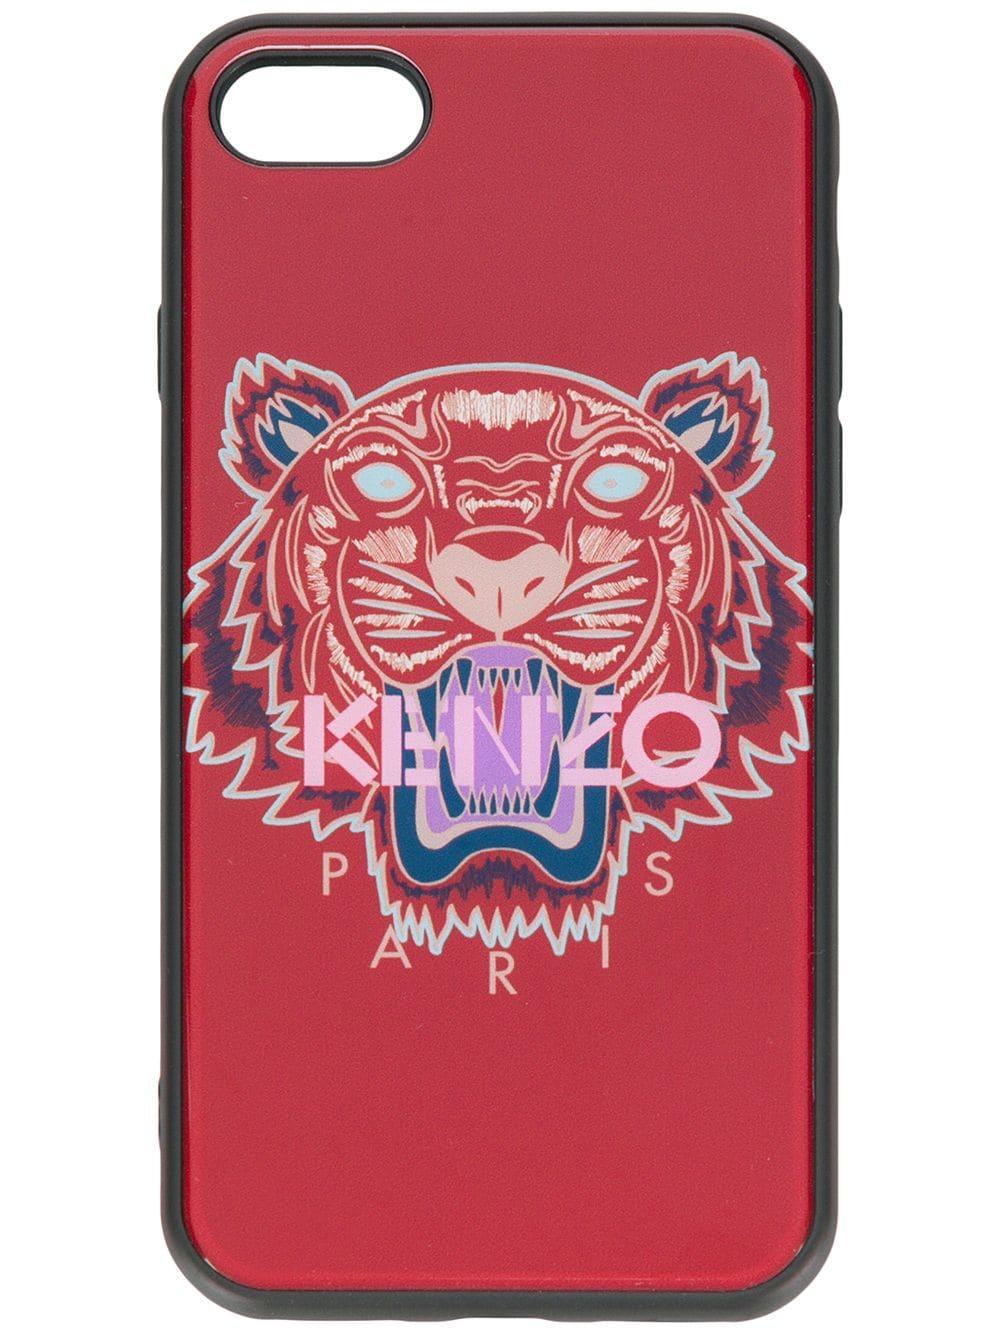 Kenzo Tiger Iphone 7/8 Case - Red 